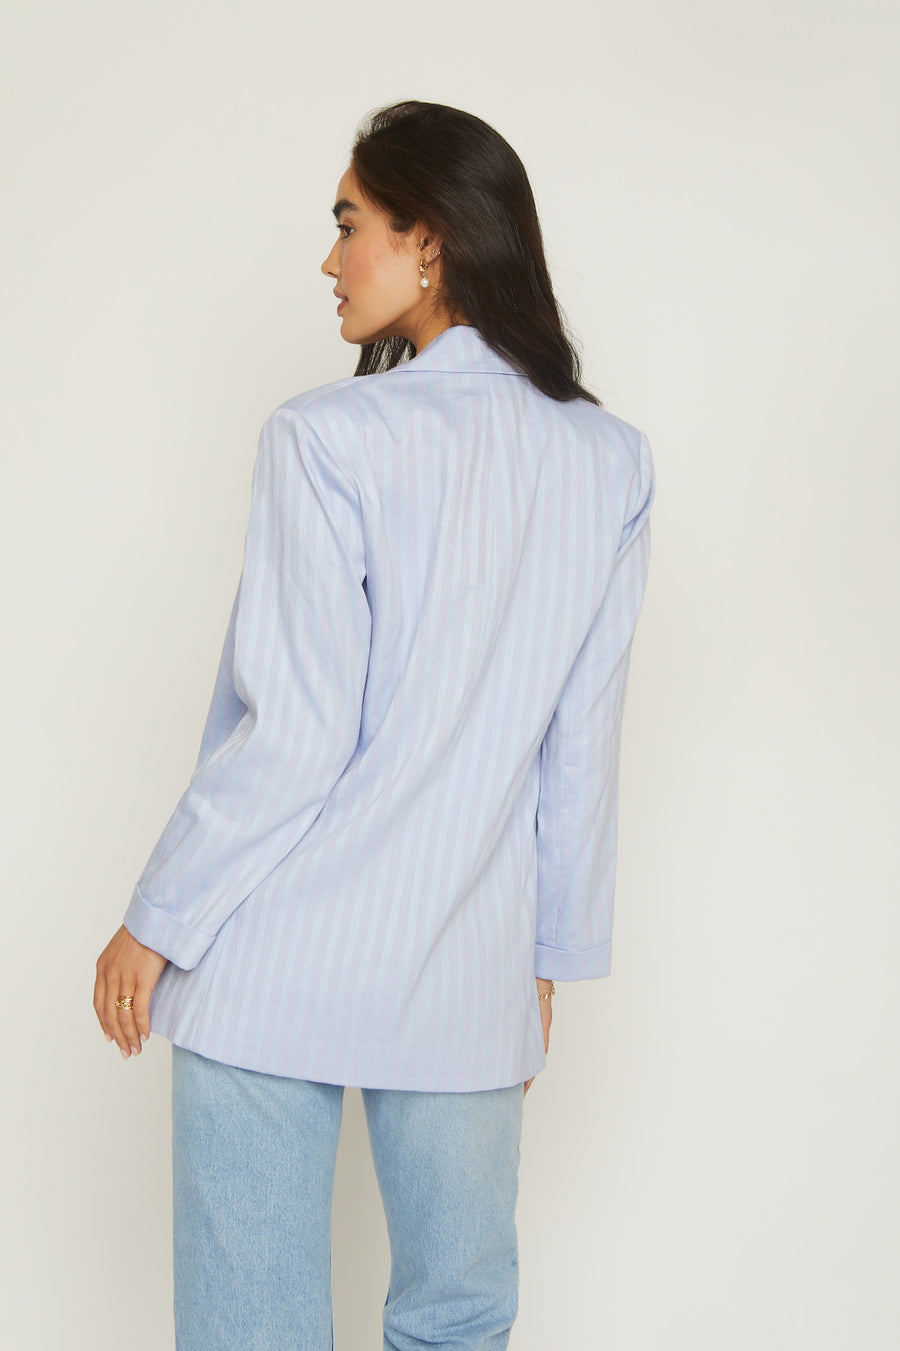 No Srcipt image - Images of 6 of 7 Madison jacket, oversized fit, linen blend , lustrous, sheen fabric, front pocket, open front, cuffed sleeve, light blue color